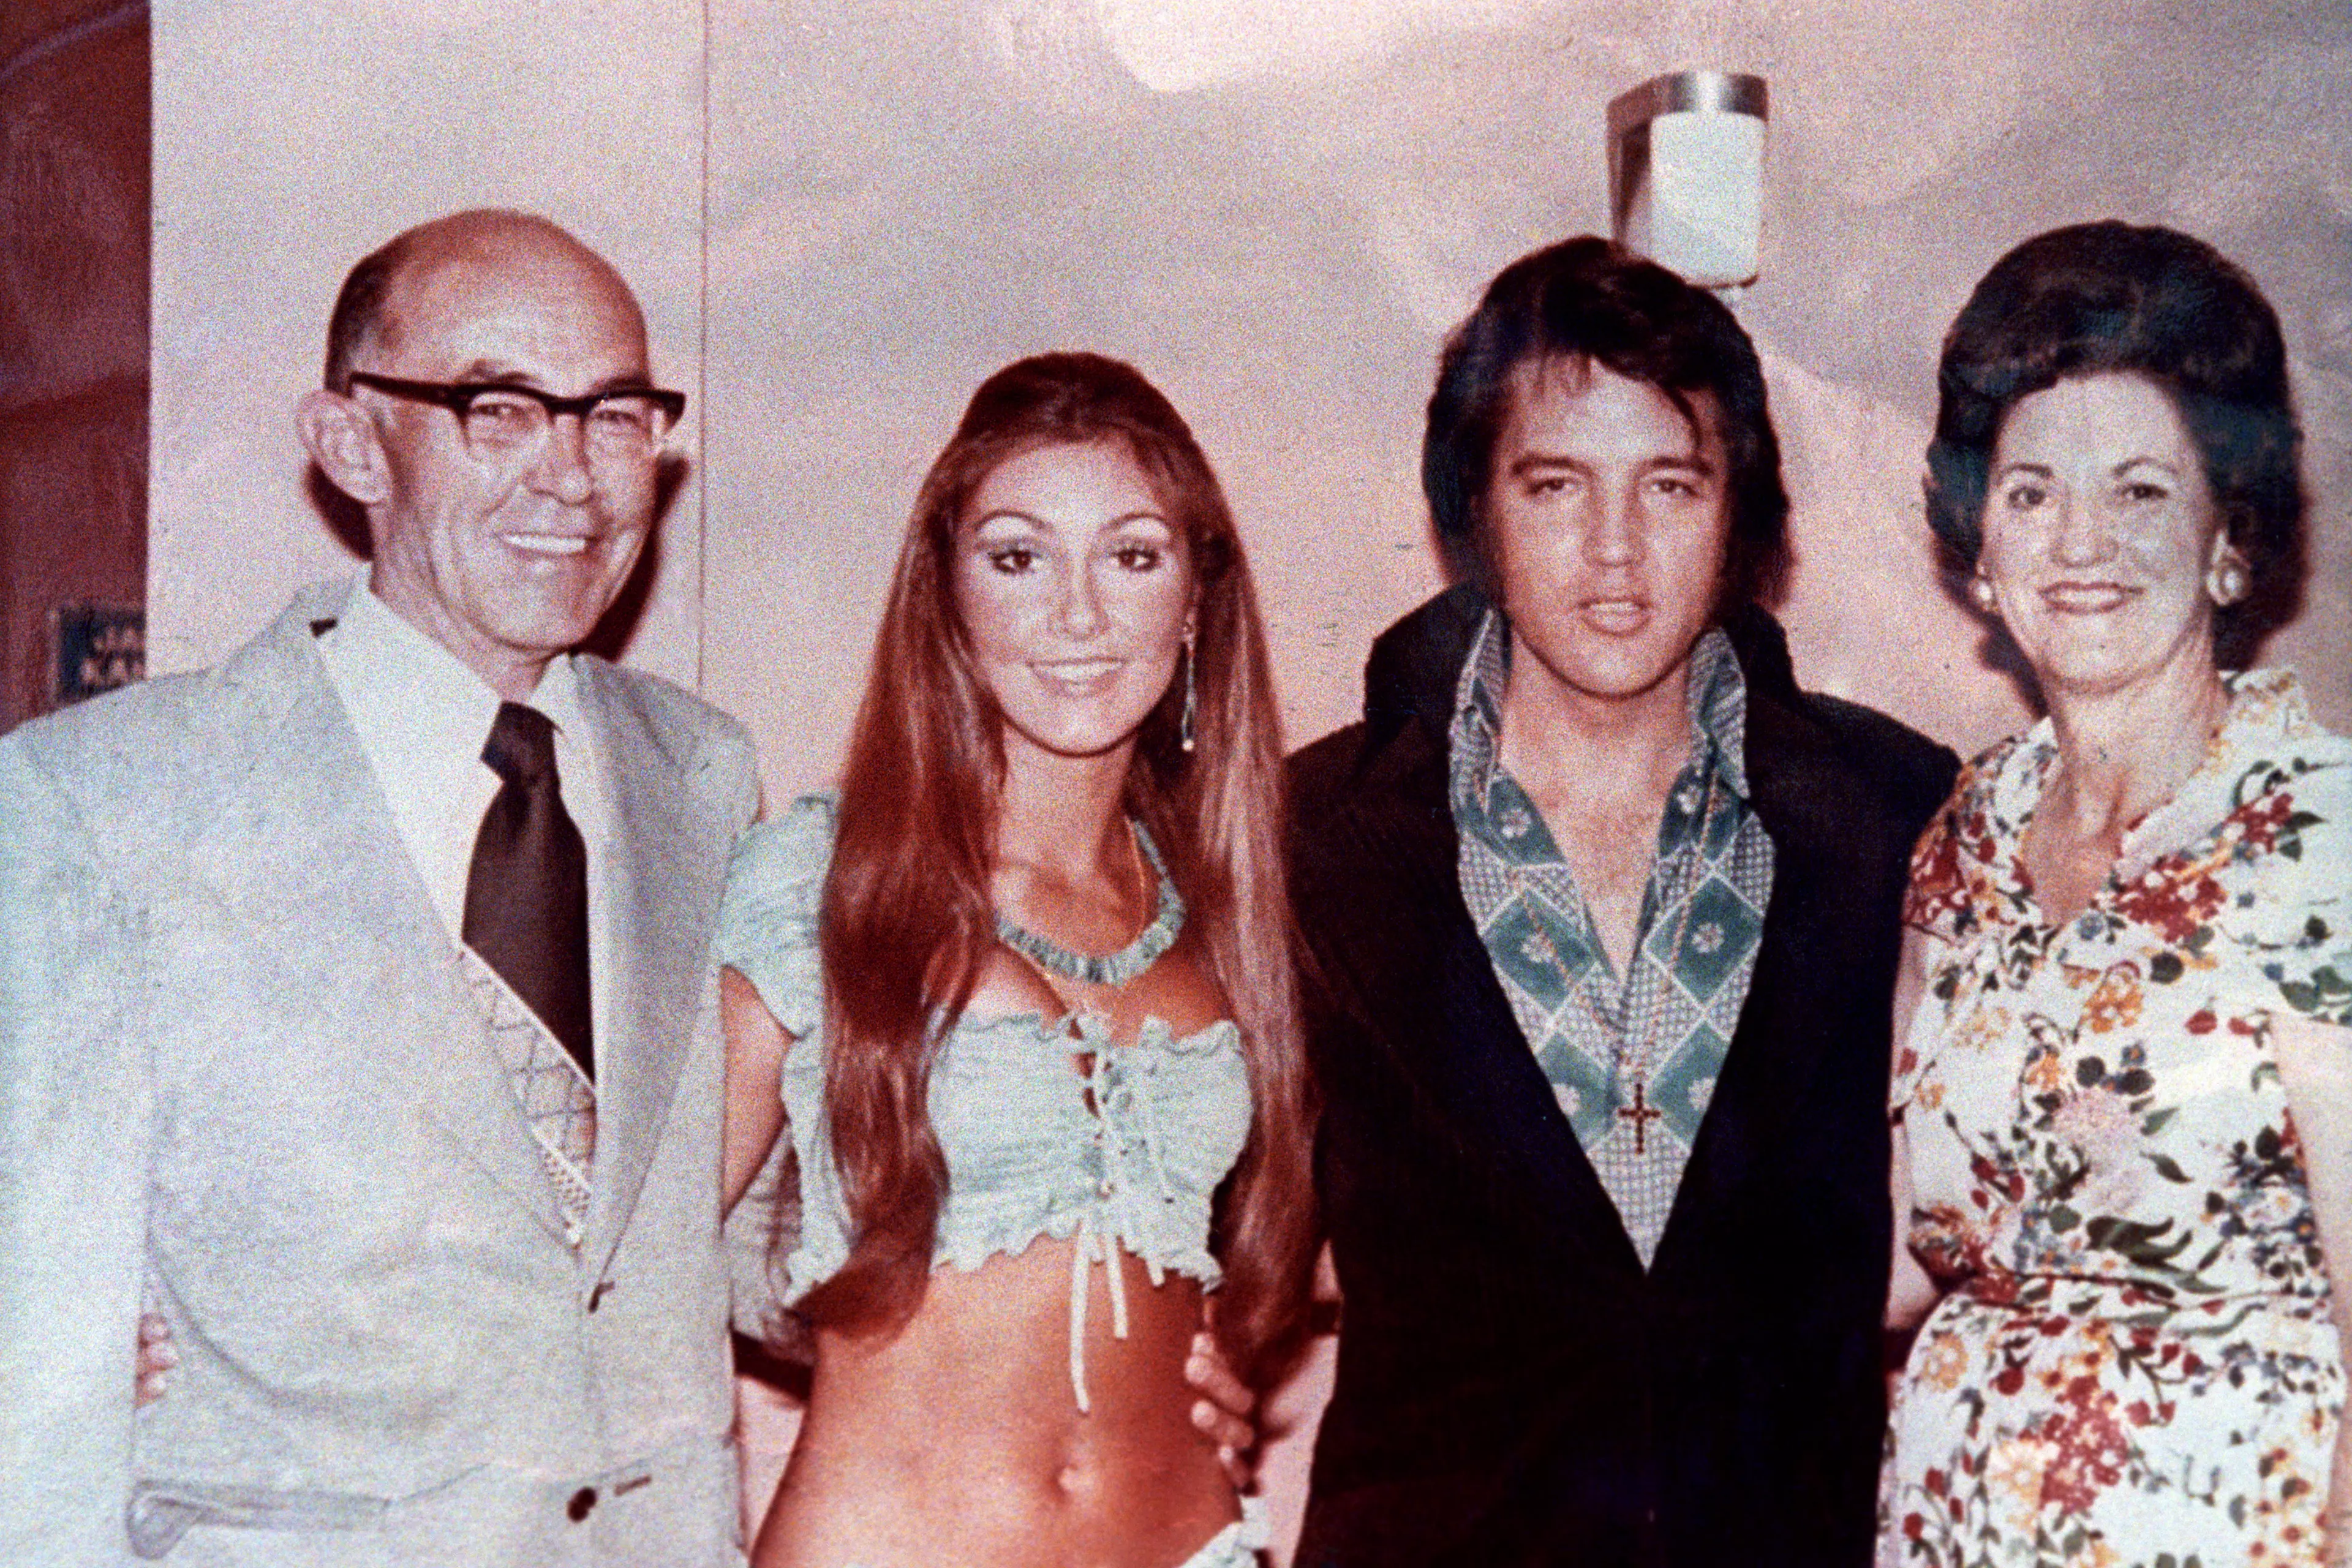 Elvis with Linda Thompson and her parents.